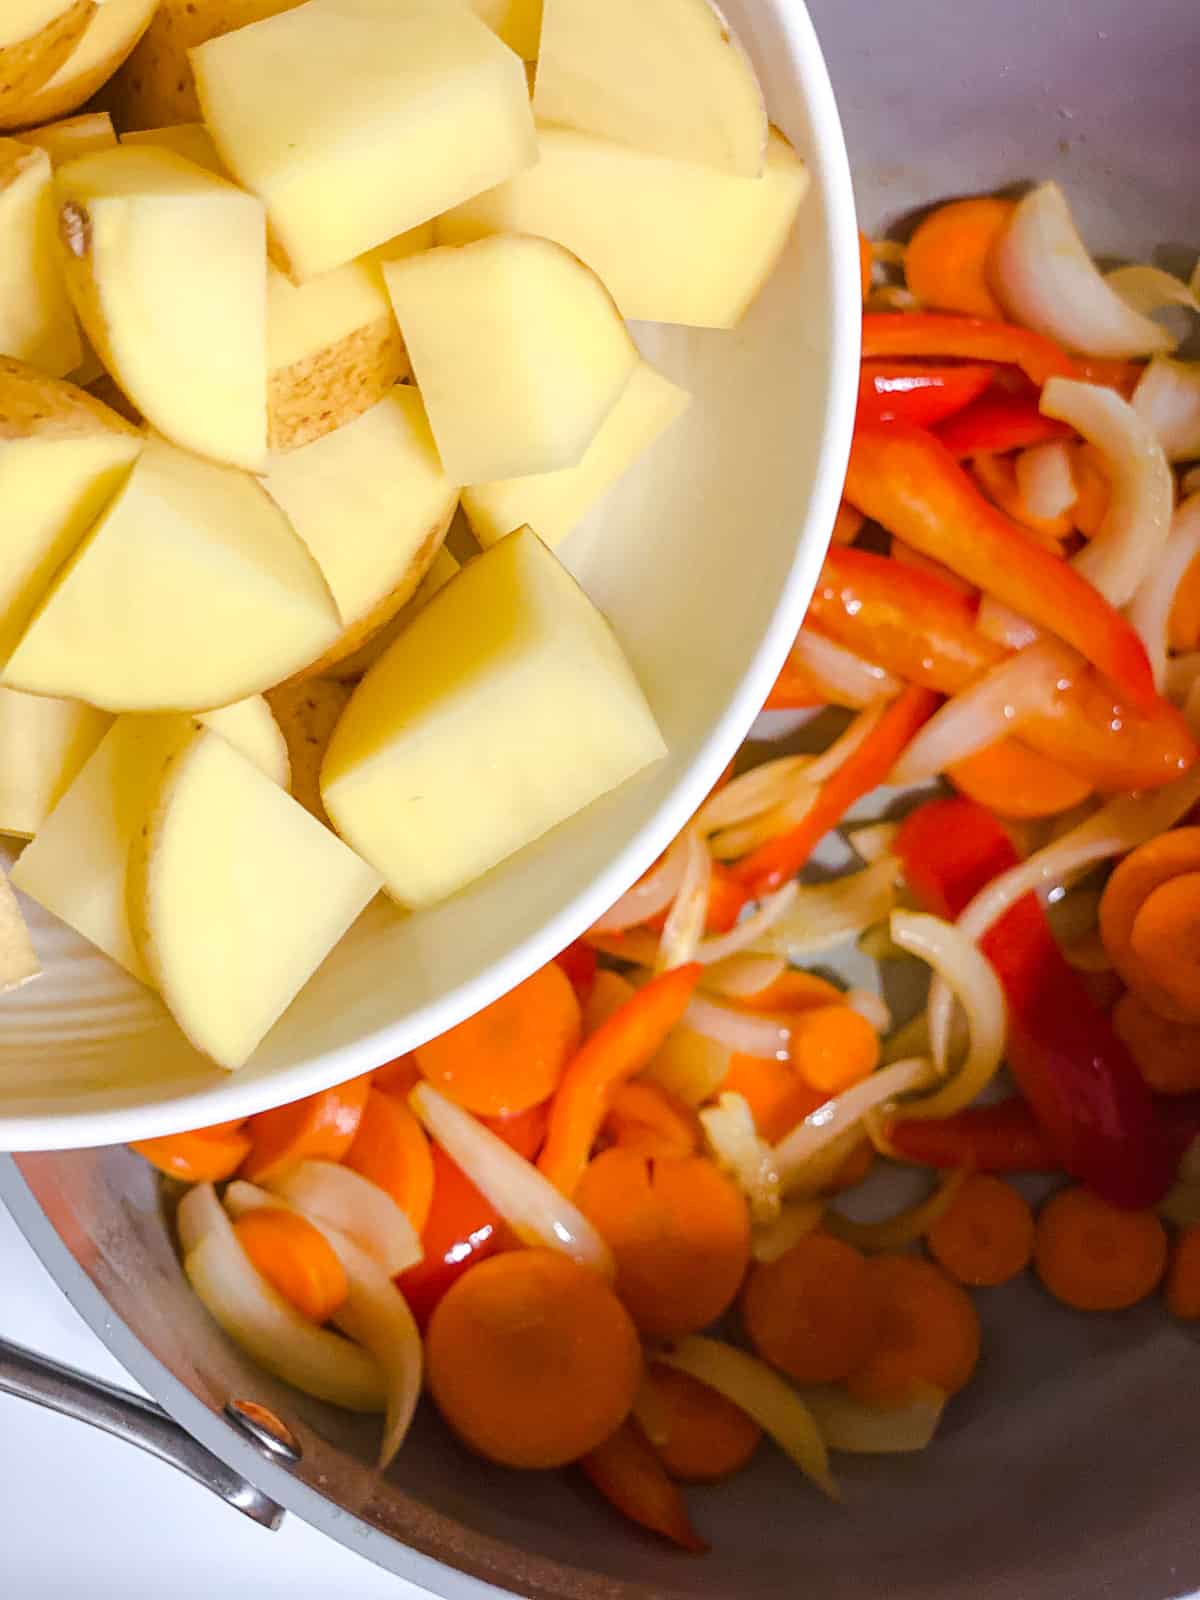 Adding potatoes to a pot with onion, oil, bell peppers, and carrots.